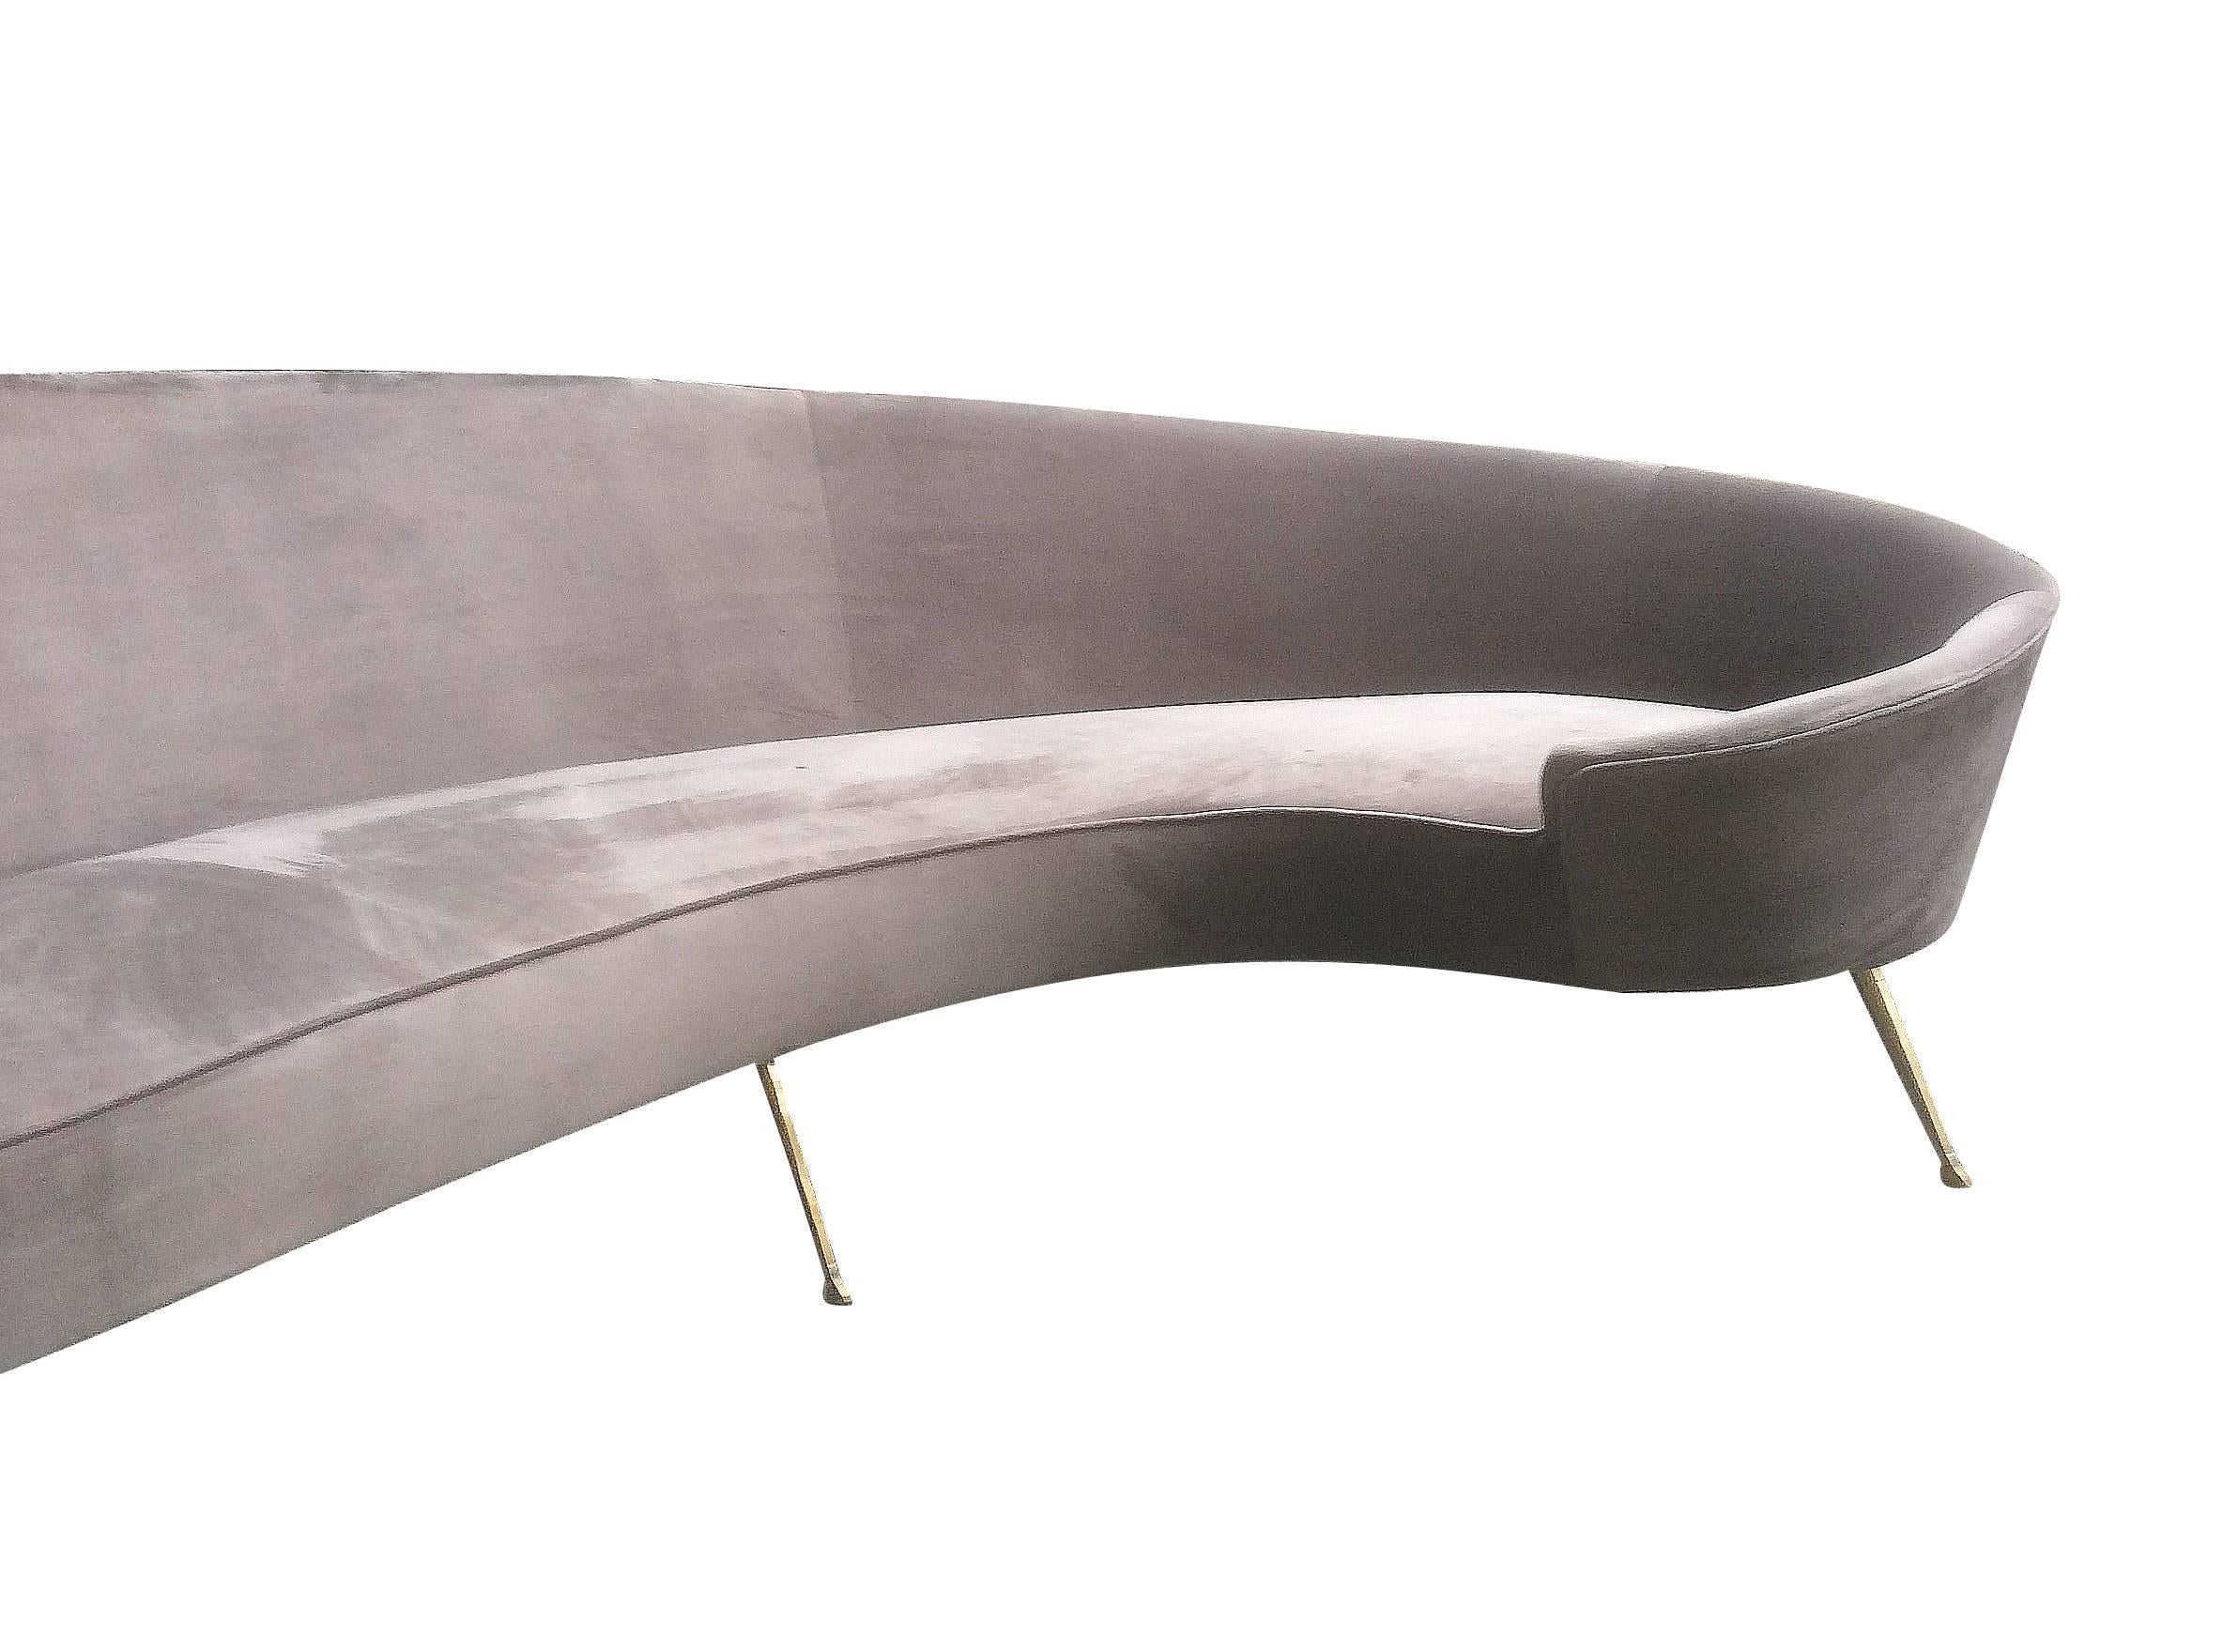 Large Italian Curved Sofa in 1950s Style 1